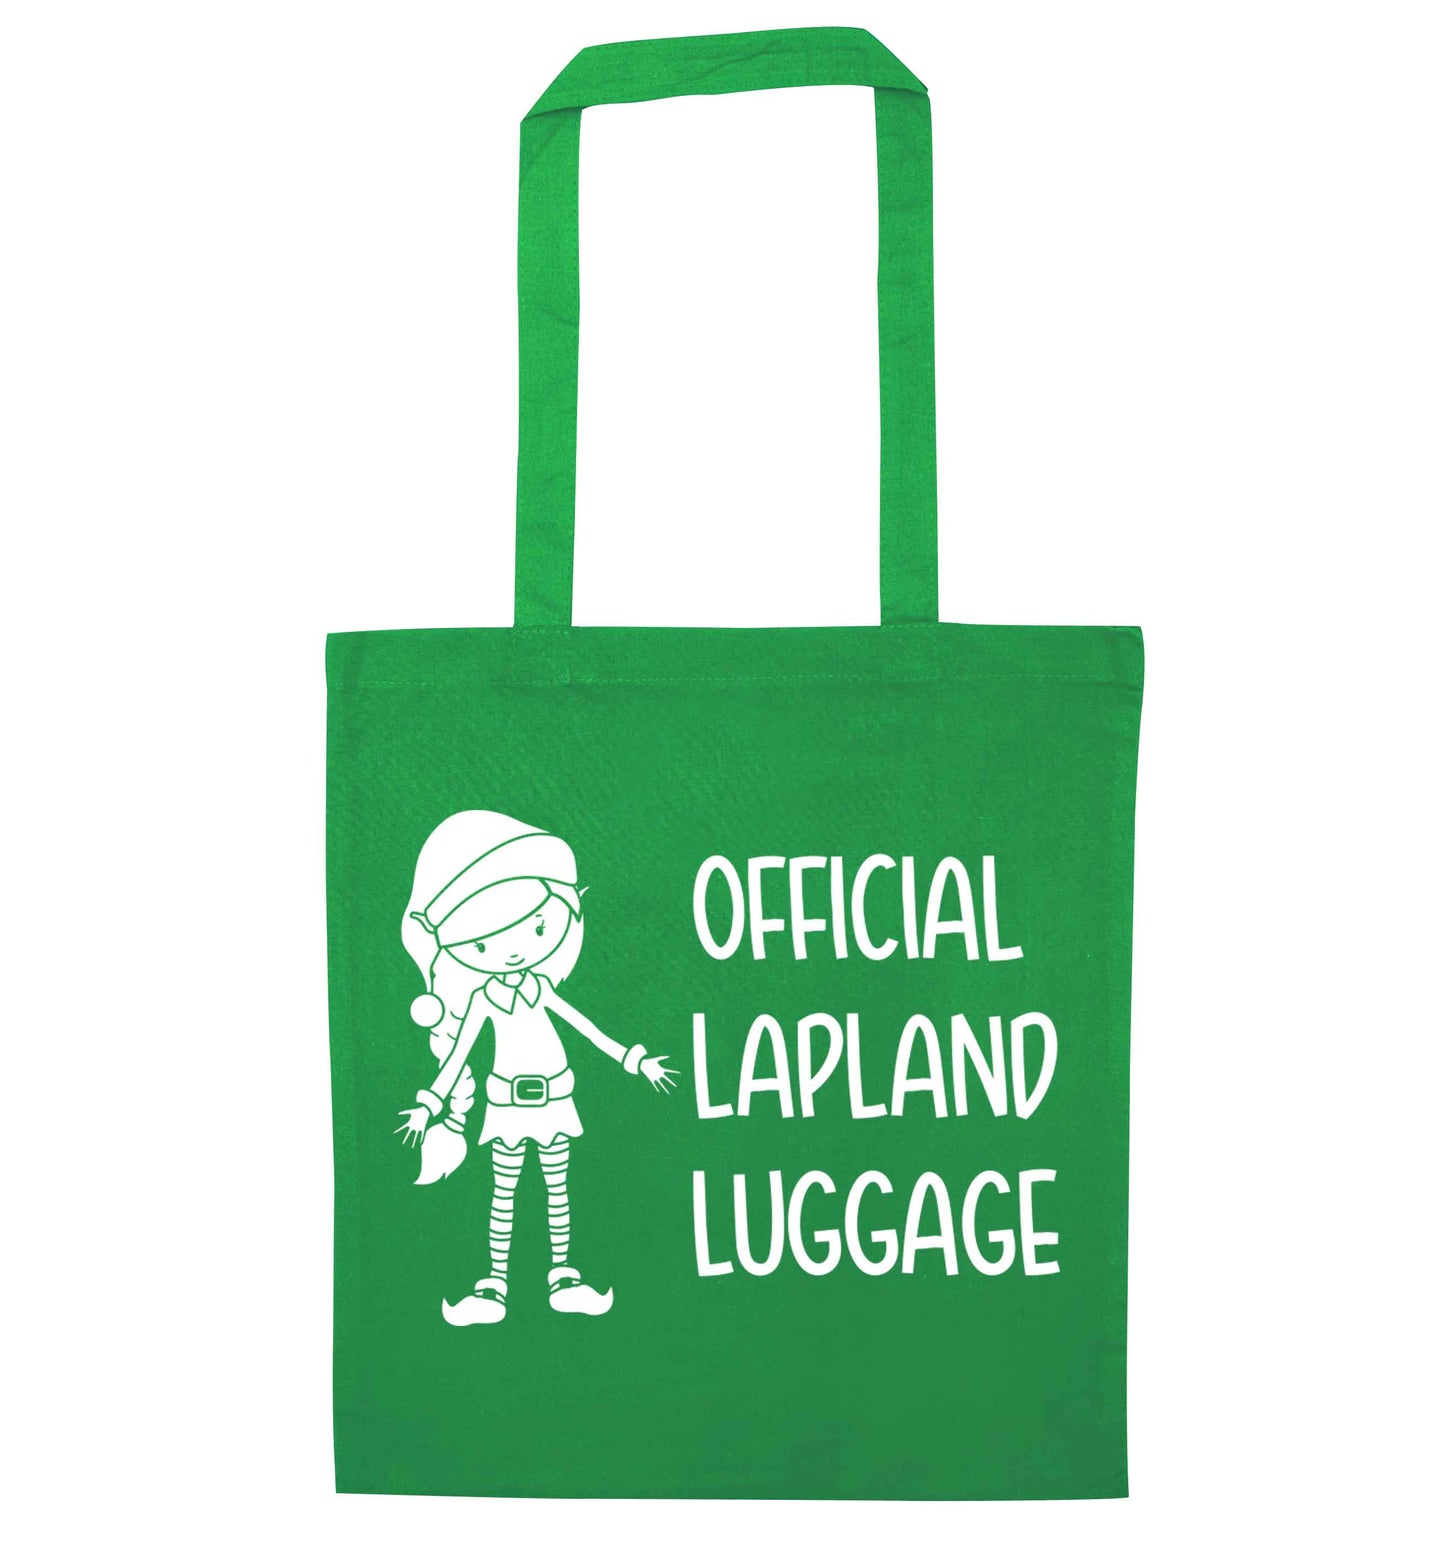 Official lapland luggage - Elf snowflake green tote bag